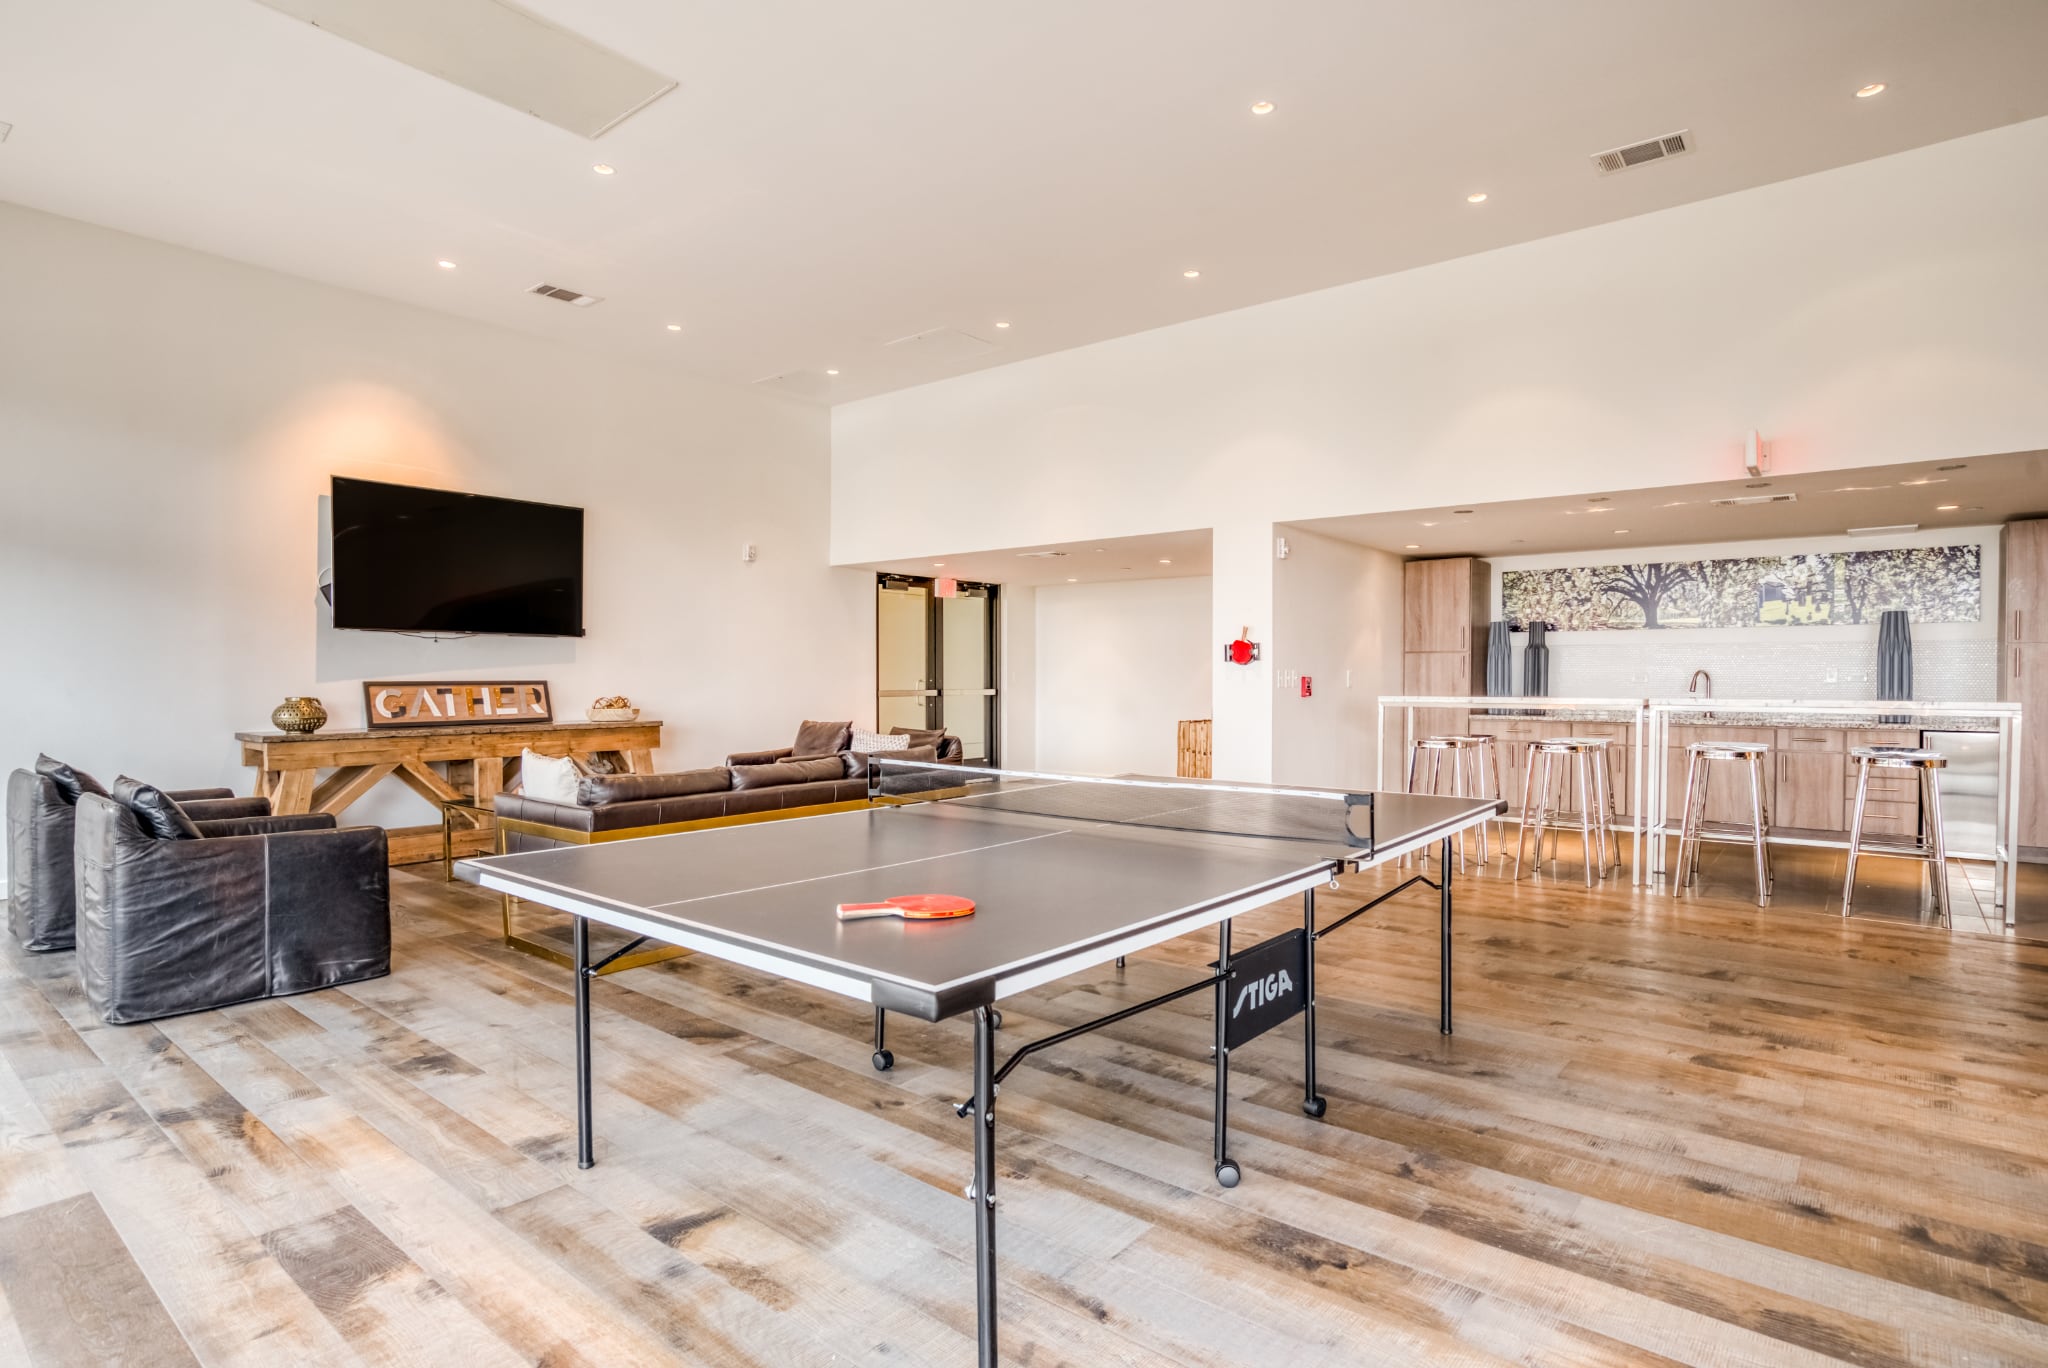 The residents' lounge at Mid Main Lofts showing a ping pong table, kitchen, and TV lounge